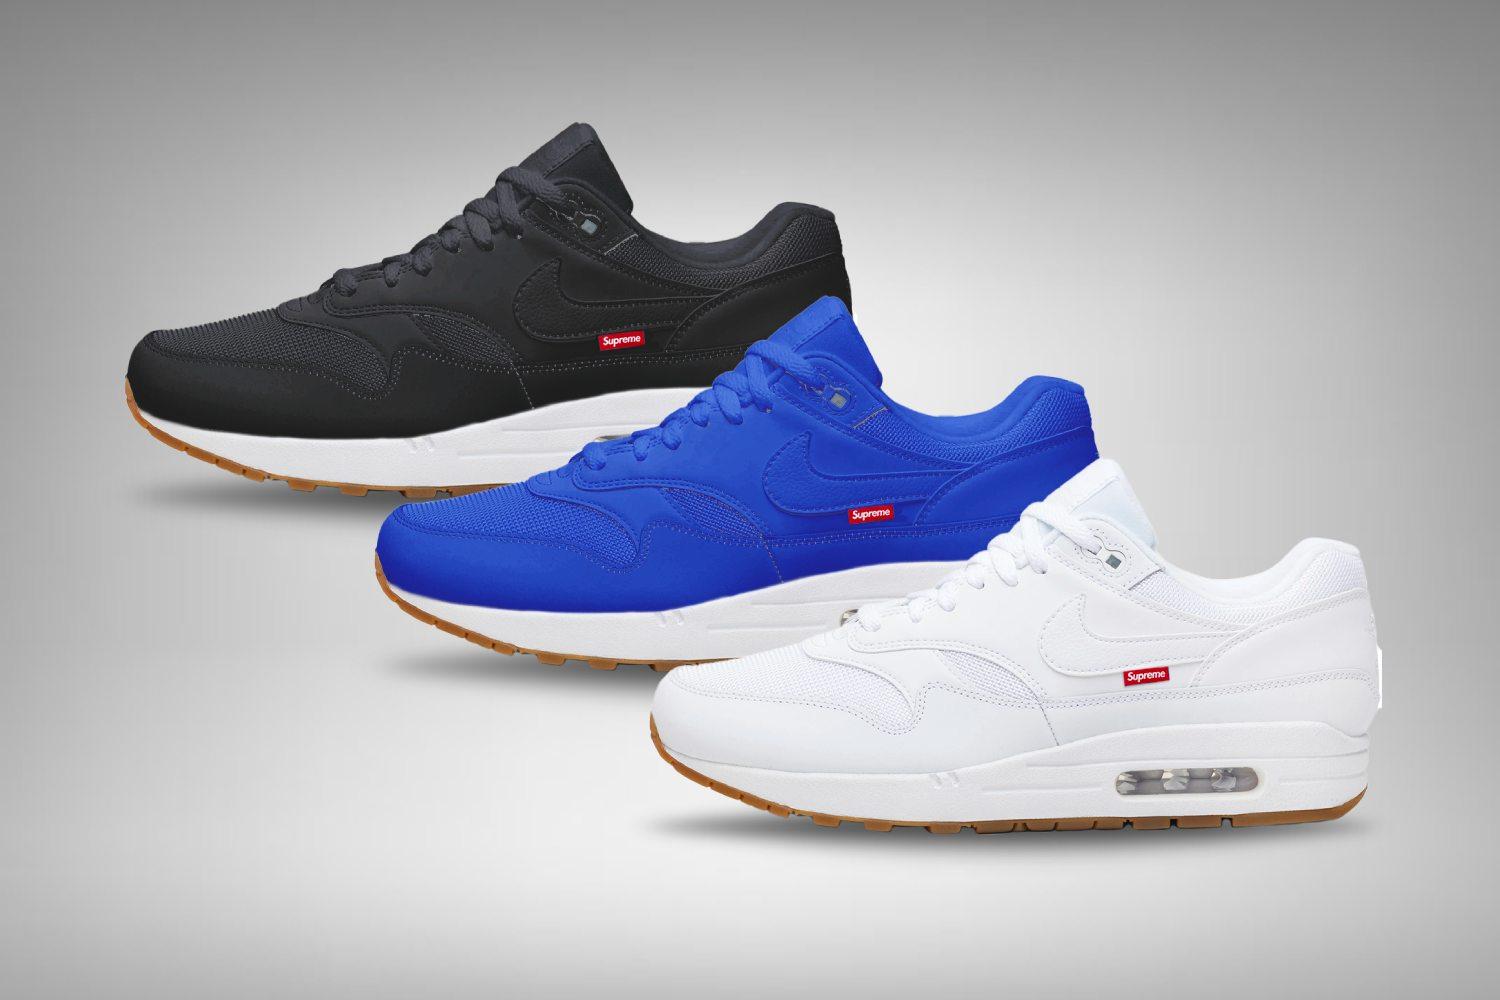 Nike and Supreme join forces for Air Max 1 collab